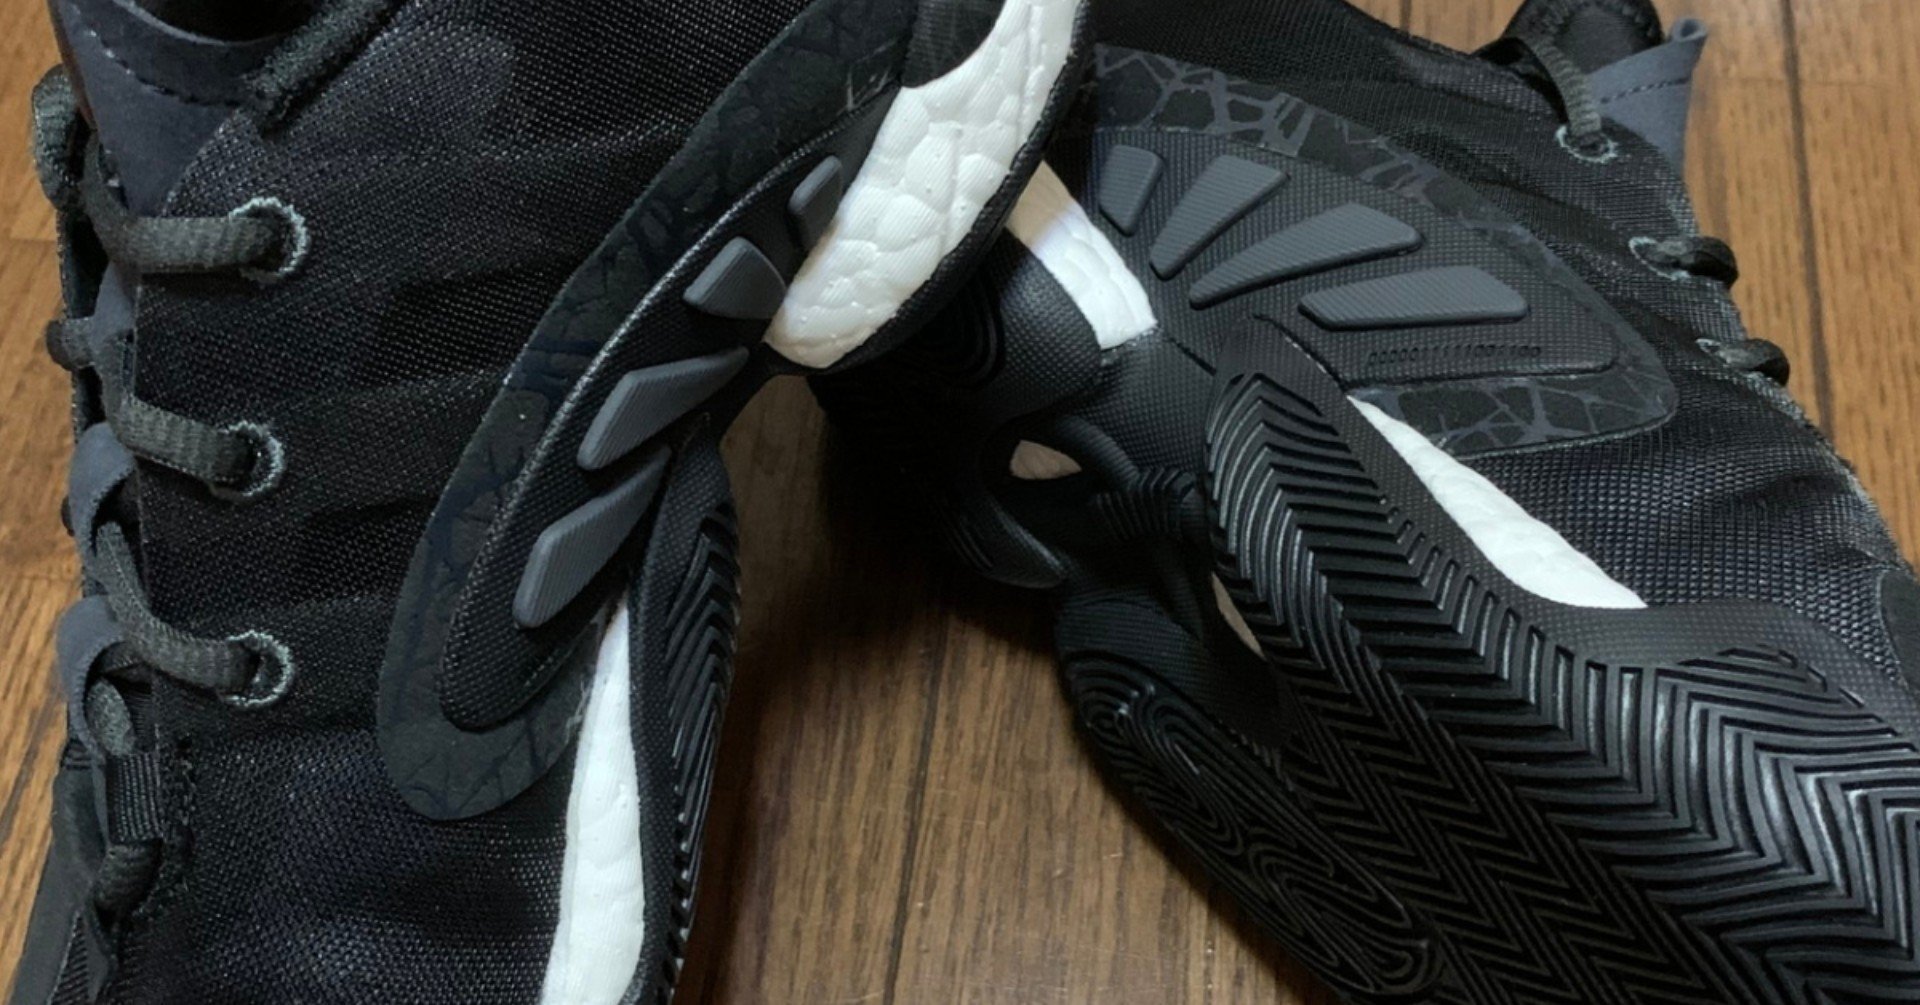 crazy byw shoes review